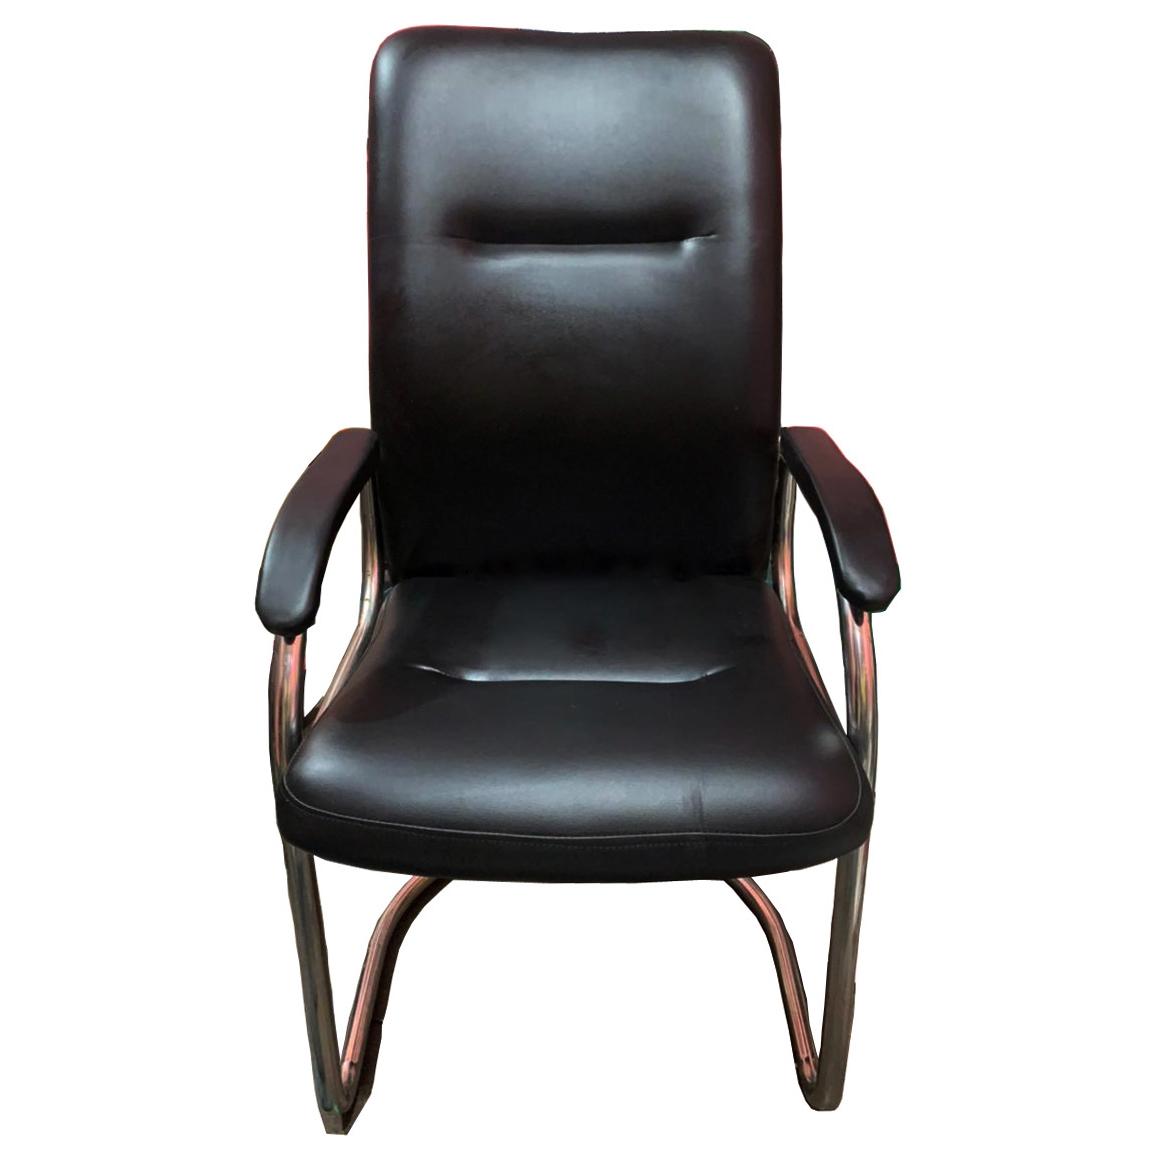 Black Executive Chair for Office (FCEC 35)